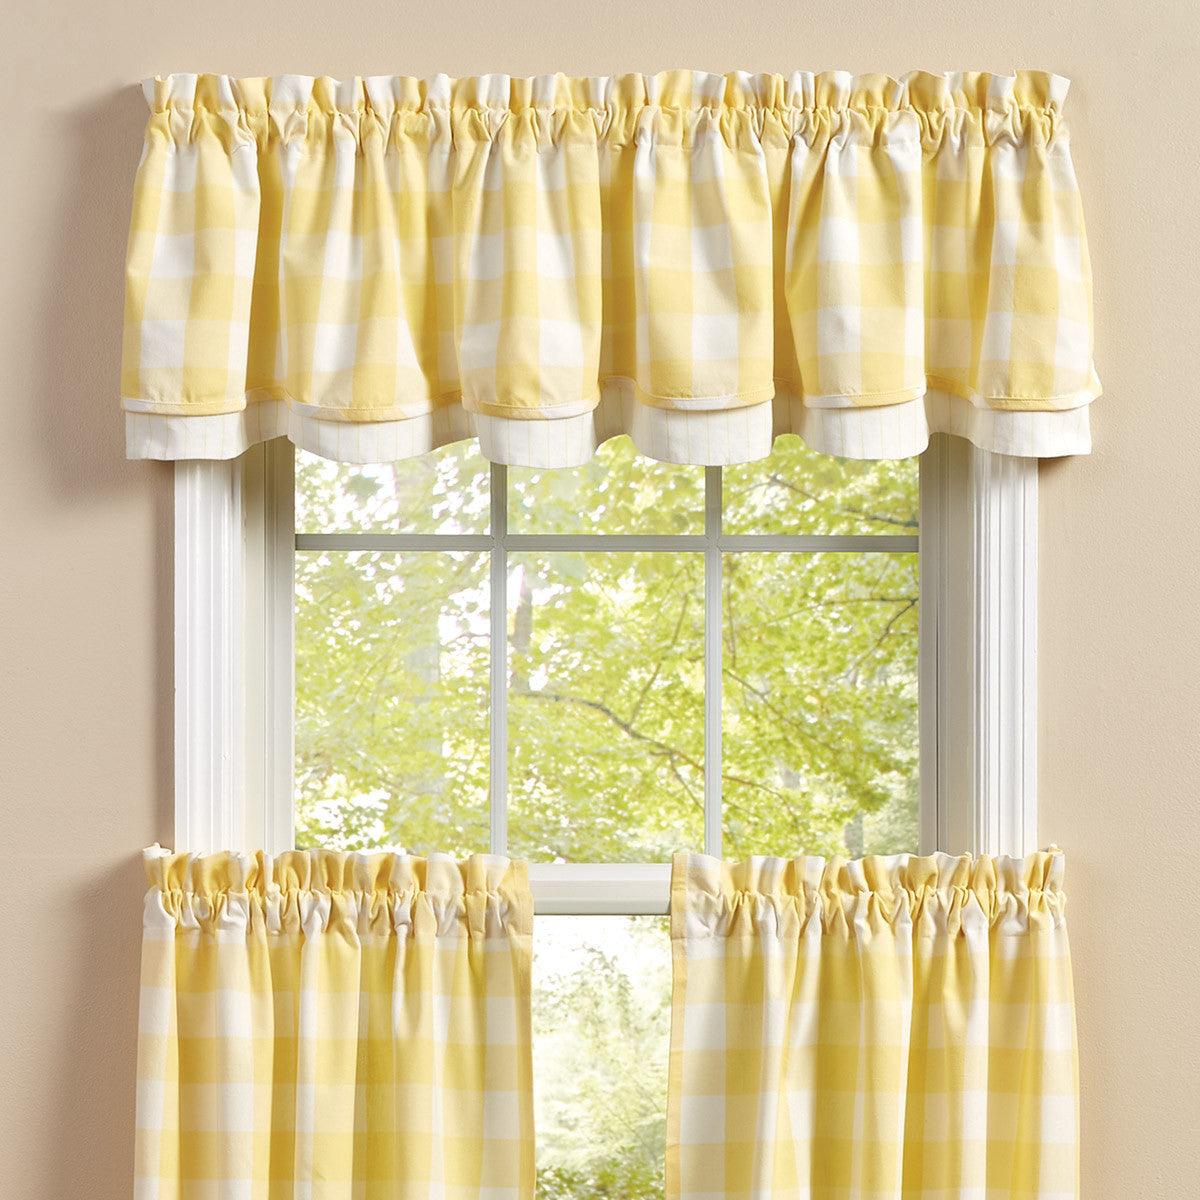 Wicklow Check Valance - Lined Layered Yellow 72"x16" Park Designs - The Fox Decor